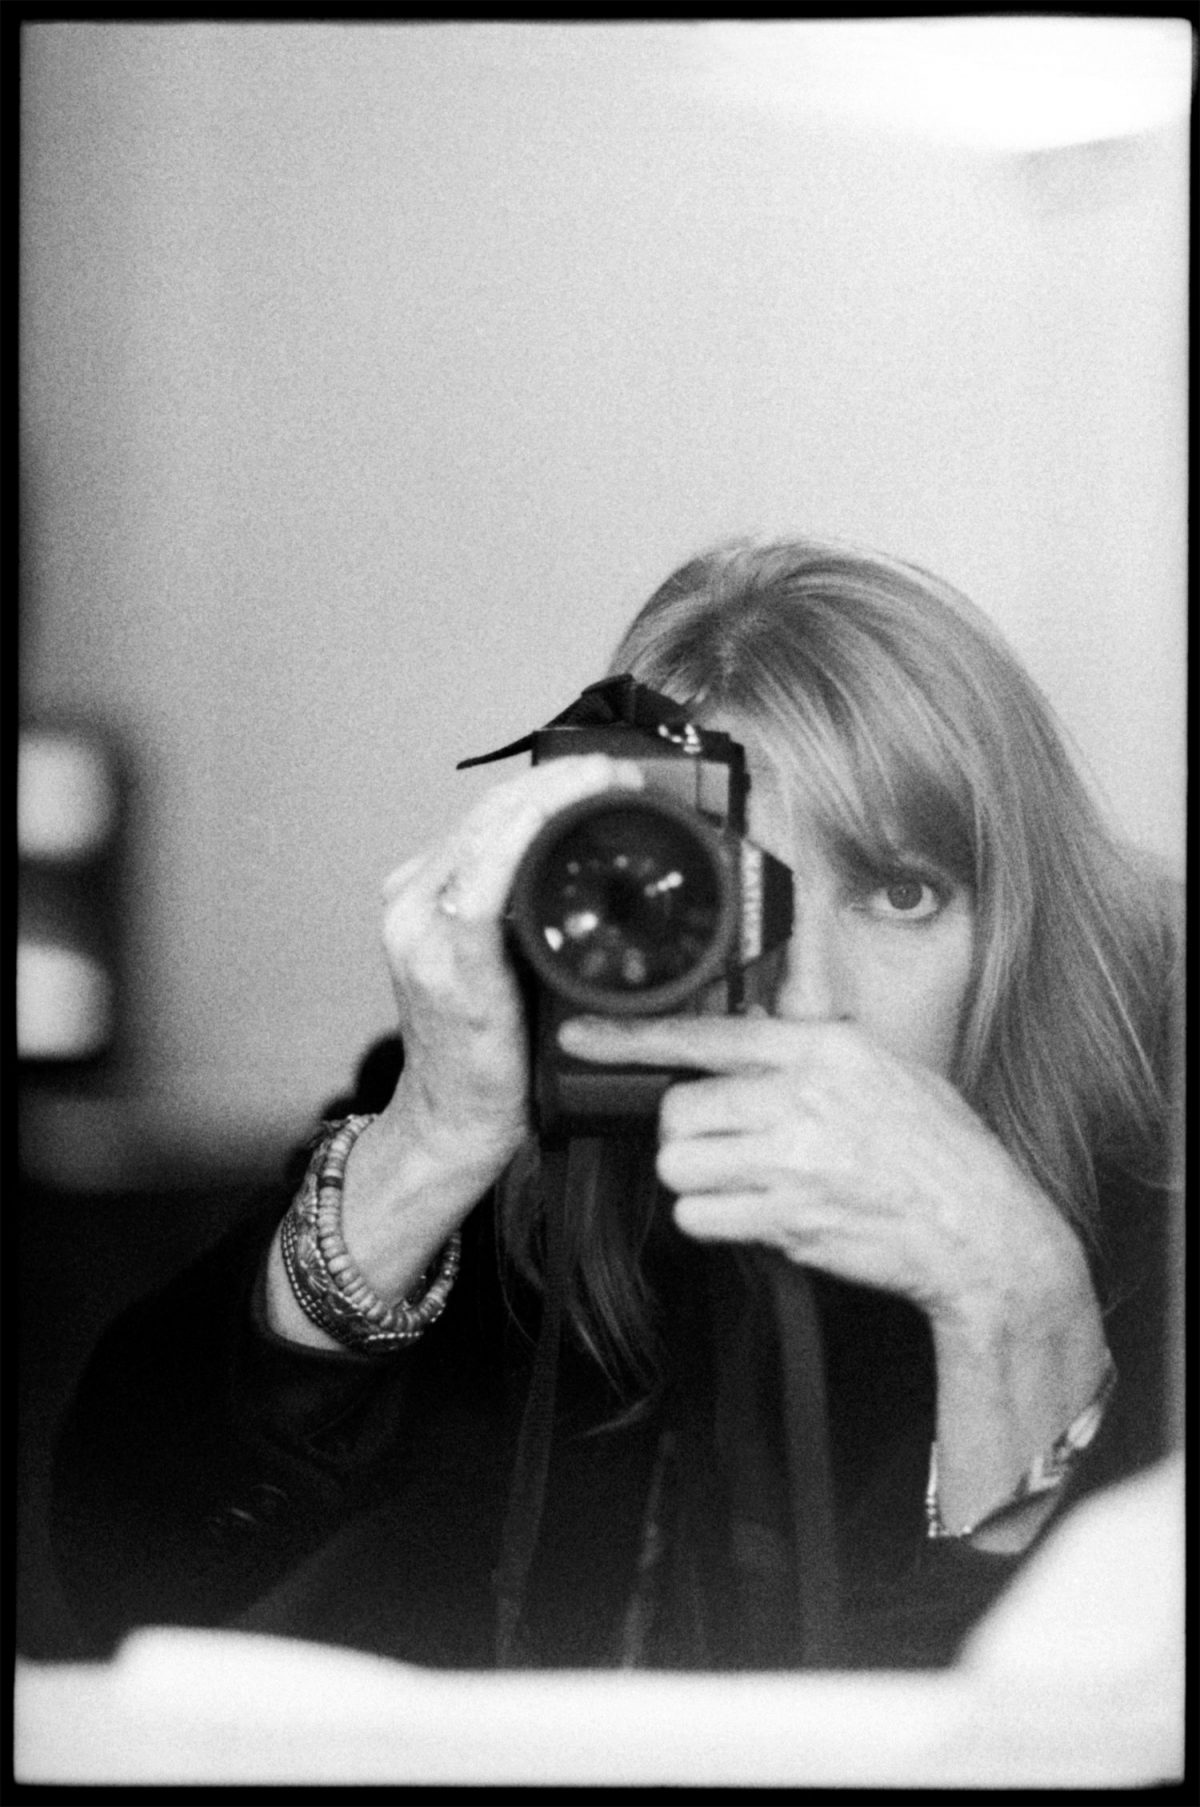 Linda McCartney, and her Photographs of Paul, The Beatles and Other Artists  photo